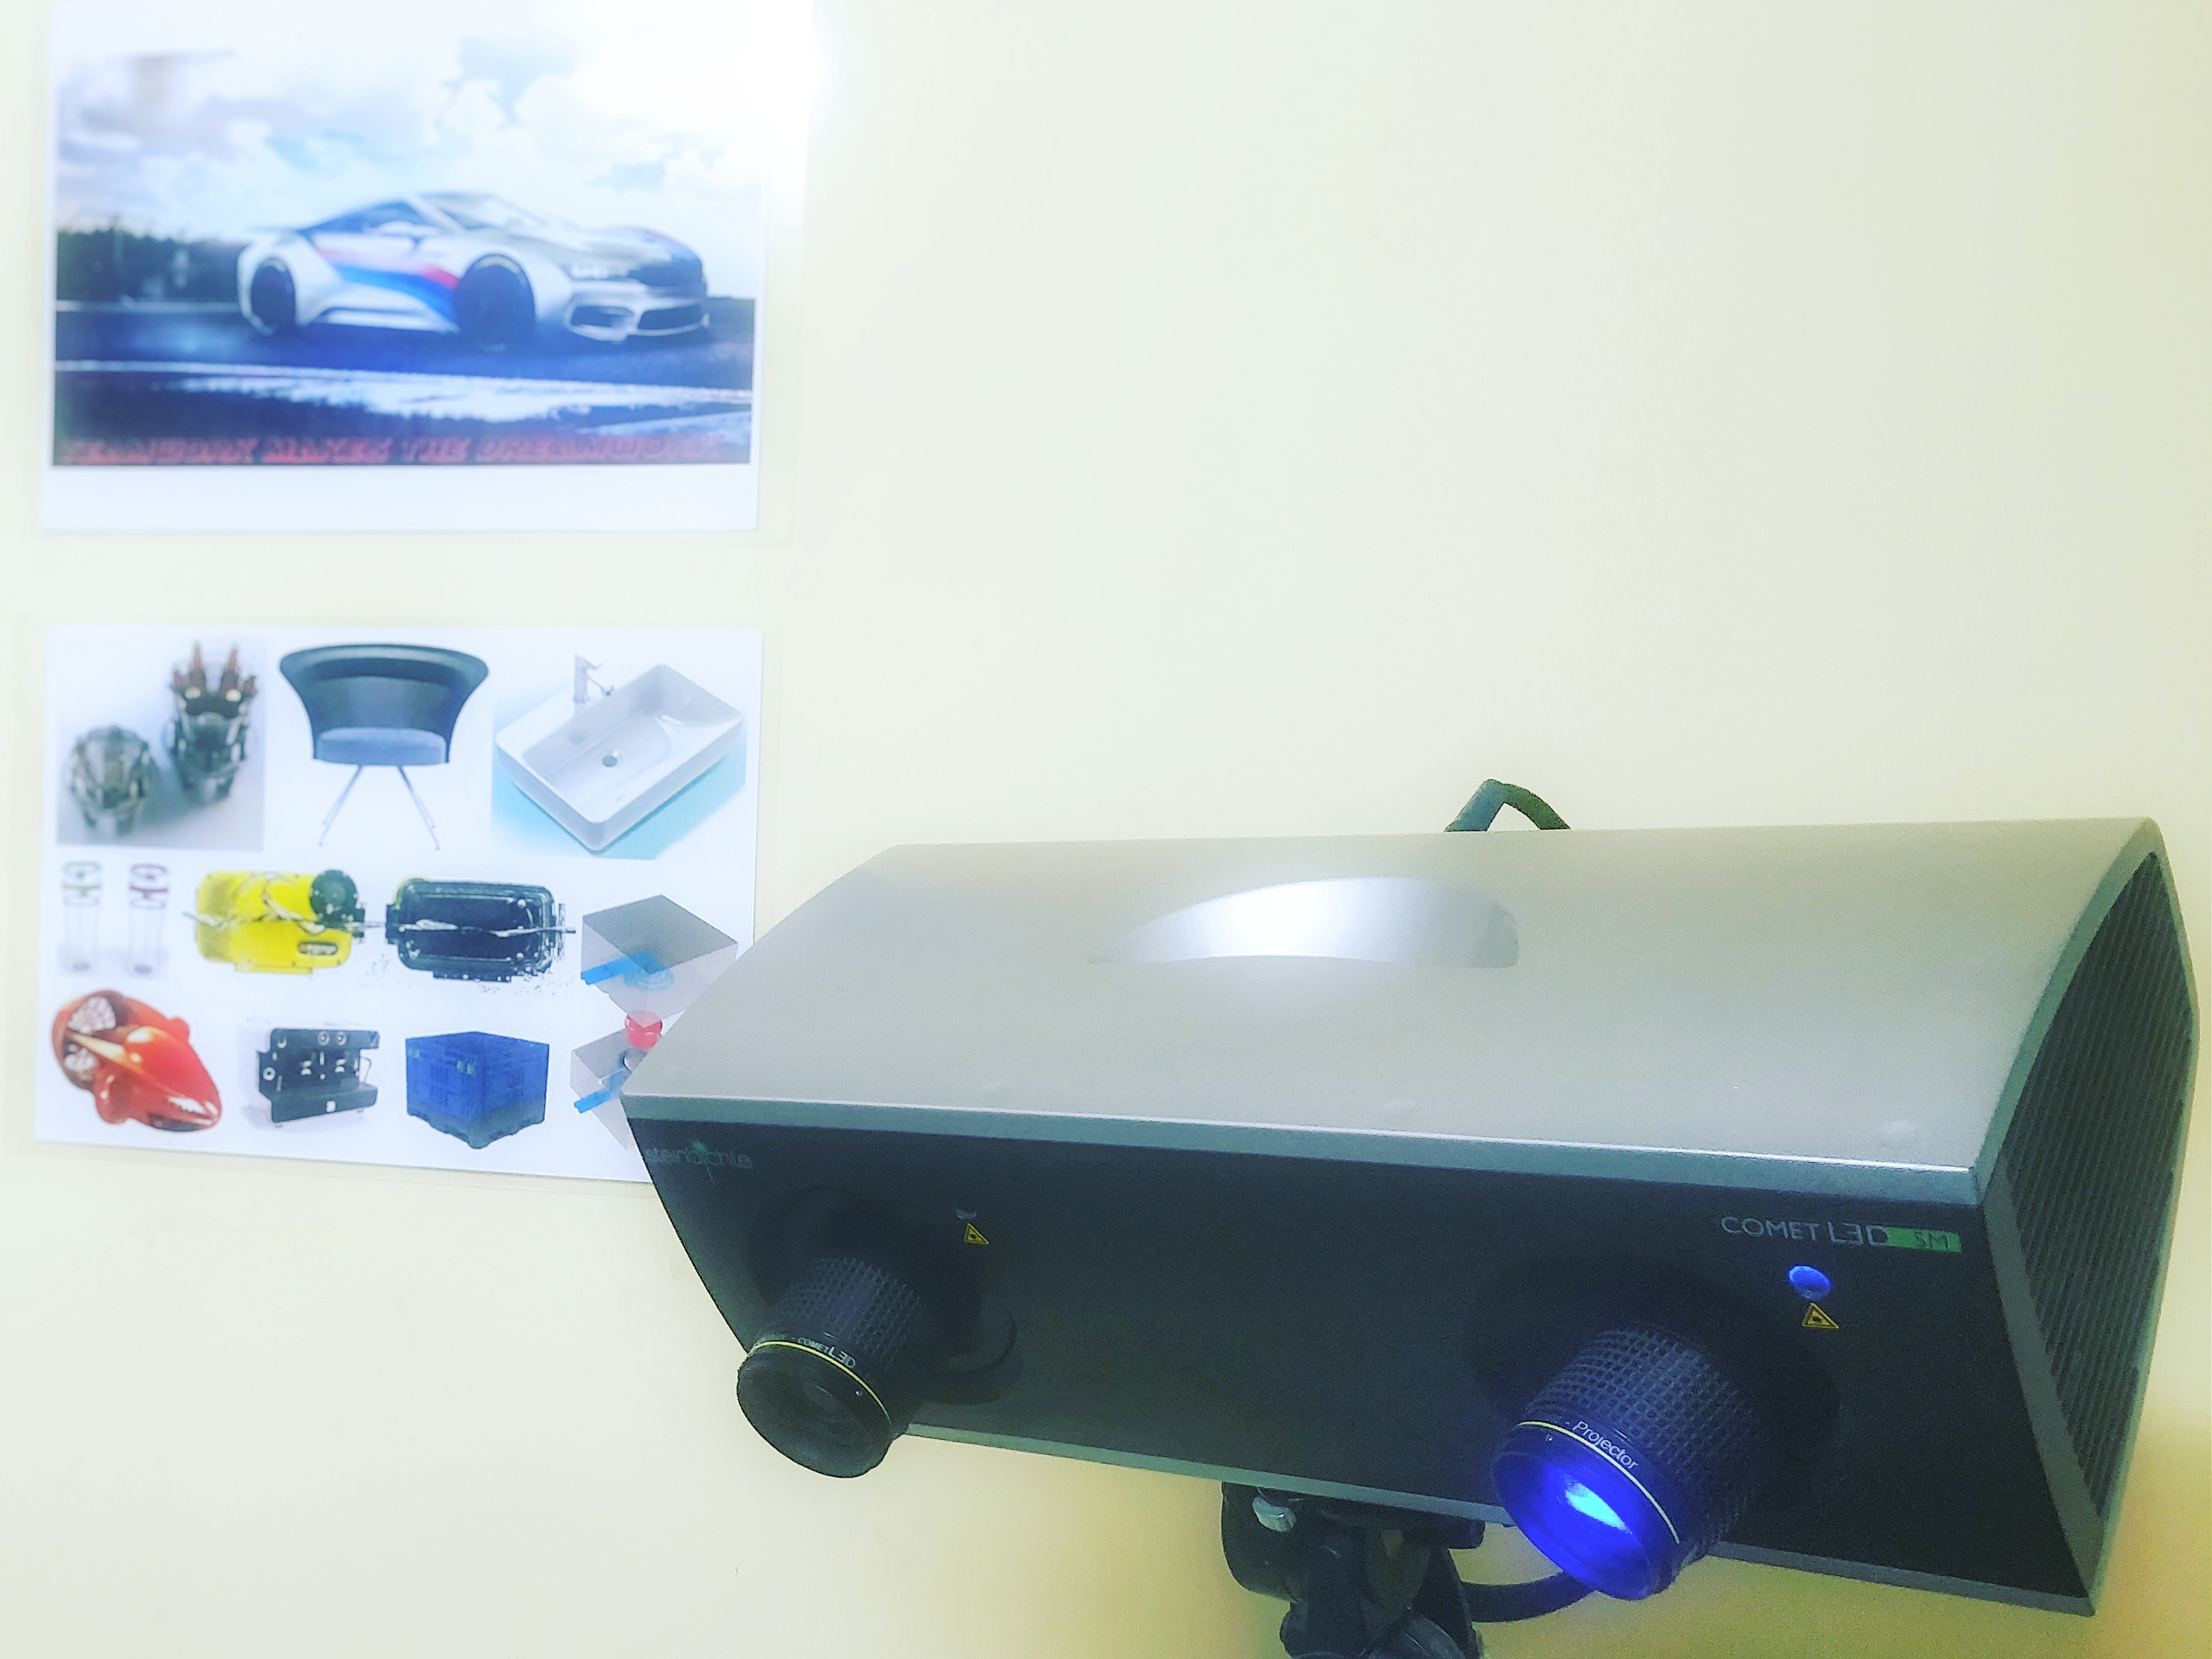 3D Scanner on display from Zeiss at RA Global Tech Solutions LLP